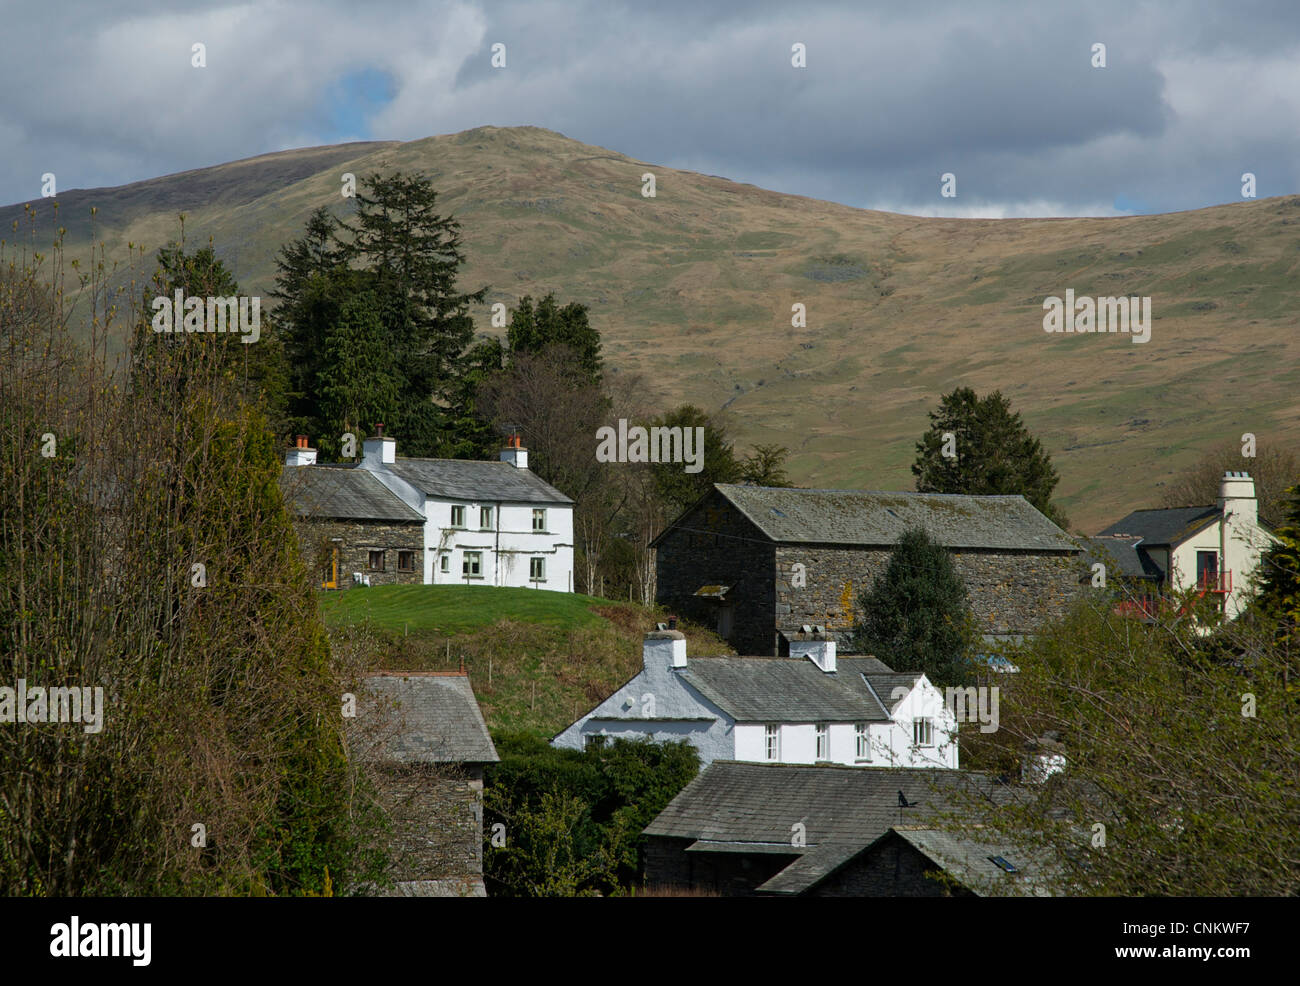 Houses in the village of Troutbeck, Lake District National Park, Cumbria, England UK Stock Photo